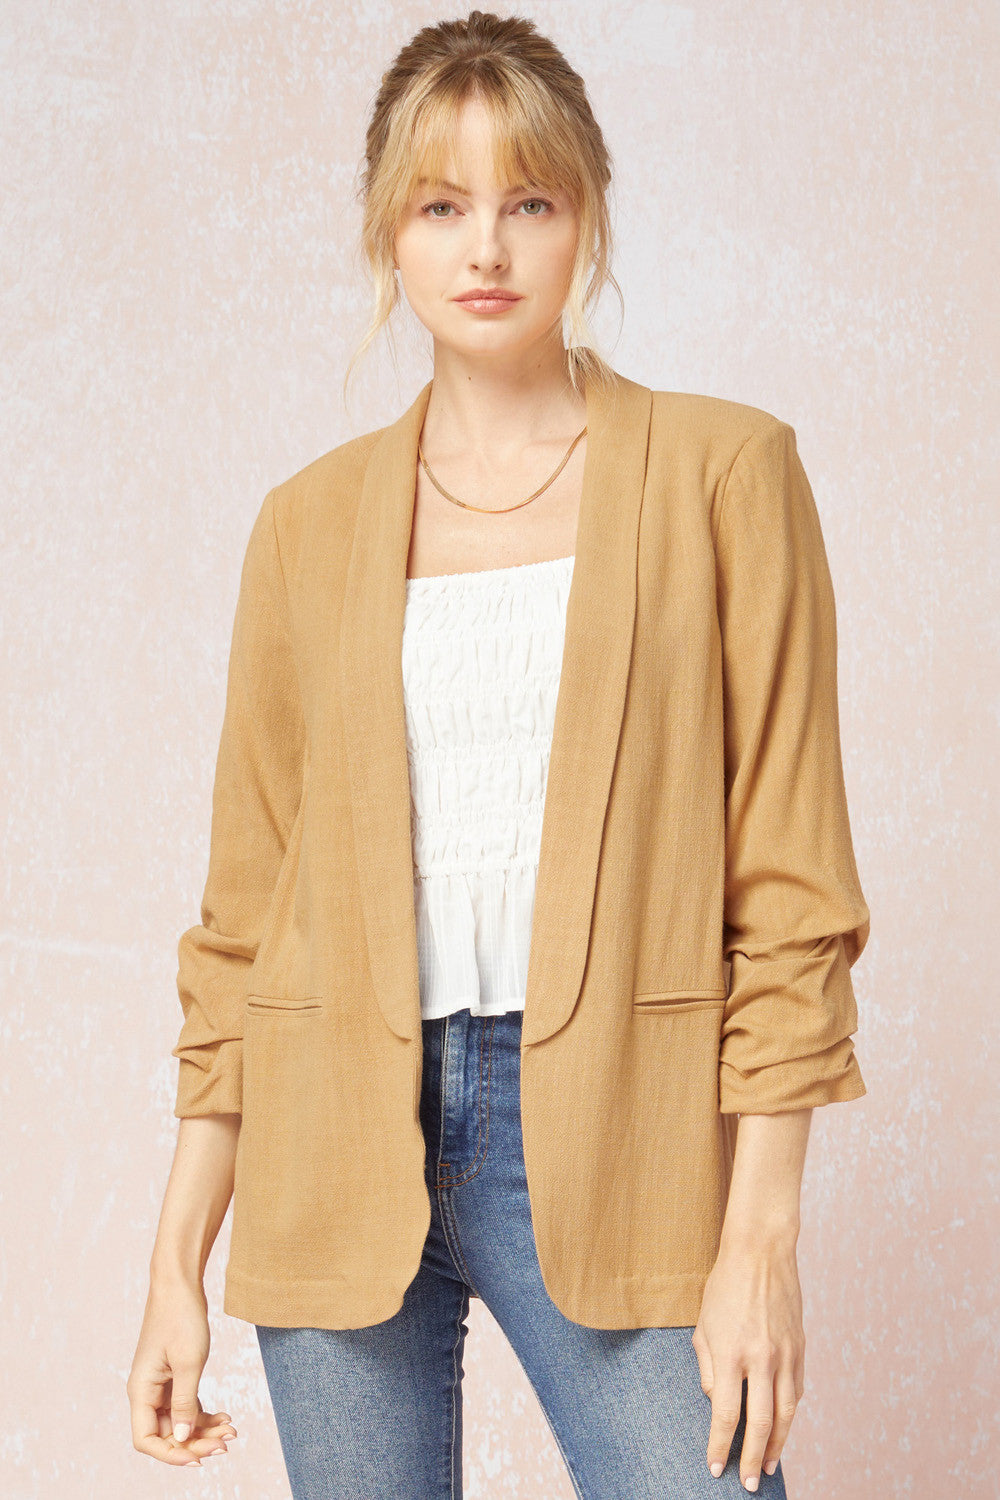 Solid blazer jacket featuring shirred detail at sleeve j13752